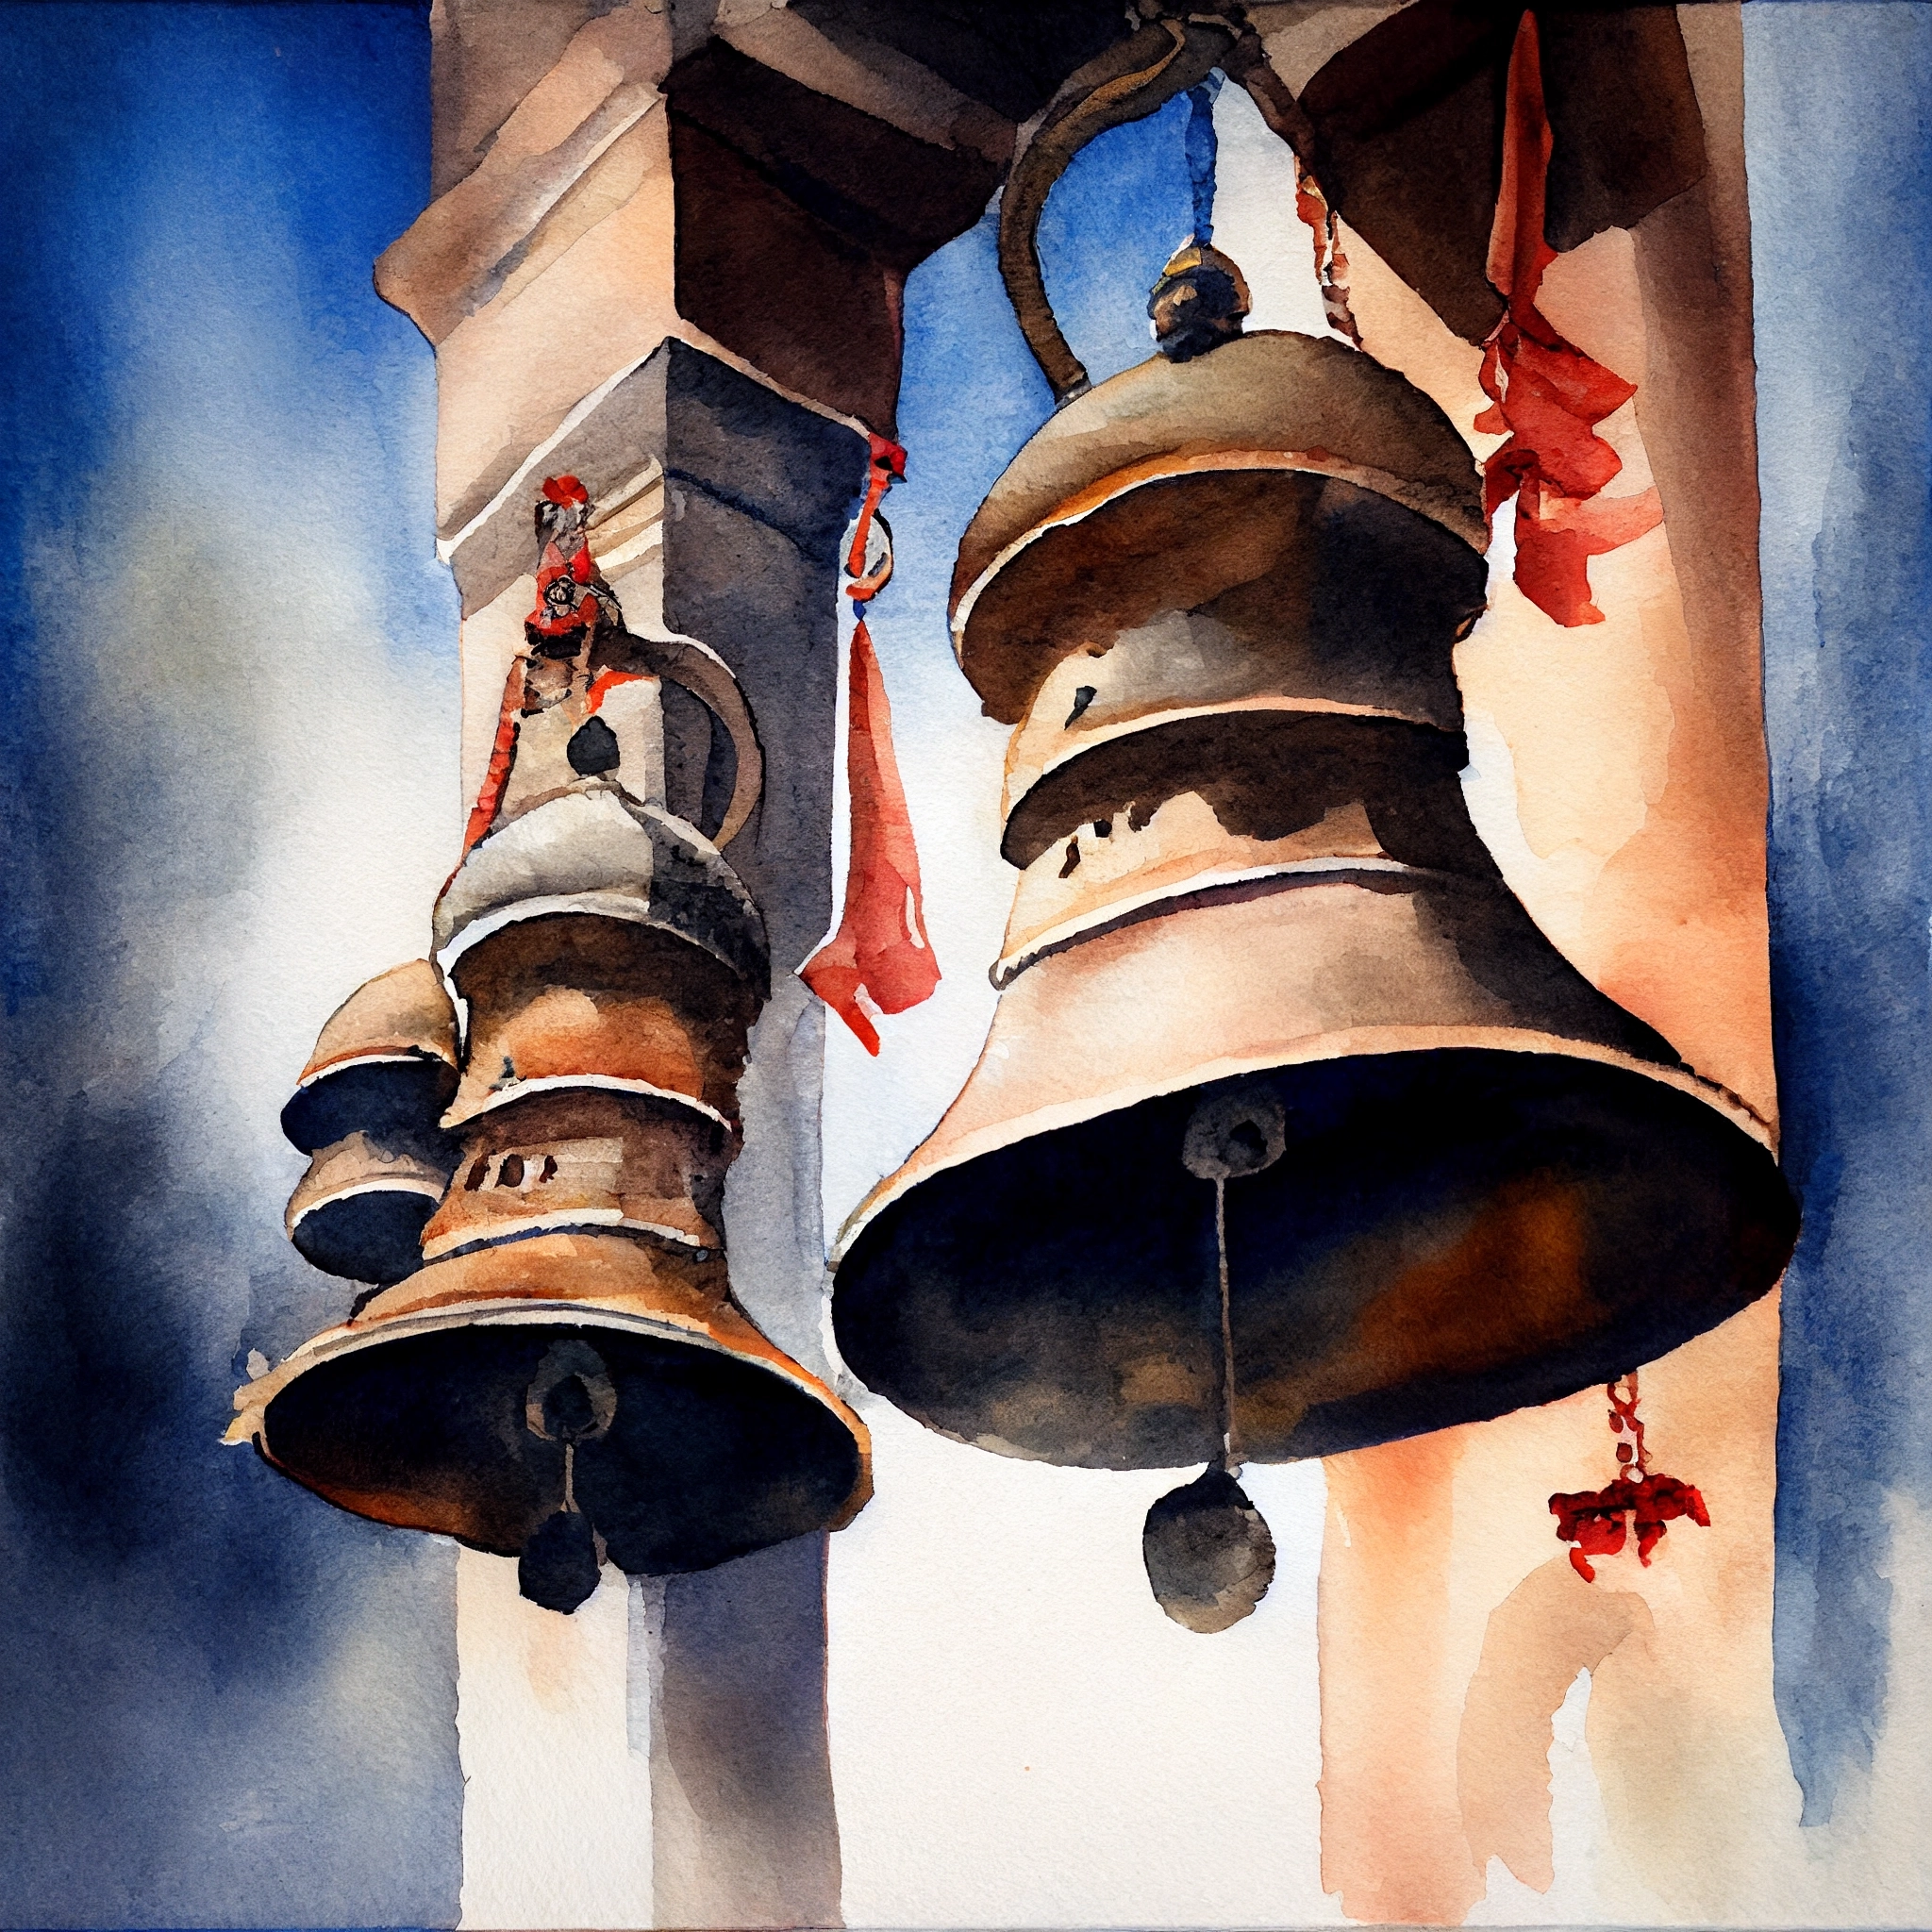 Sacred Chimes: A Watercolor Art Print of the Bells of a Hindu Temple